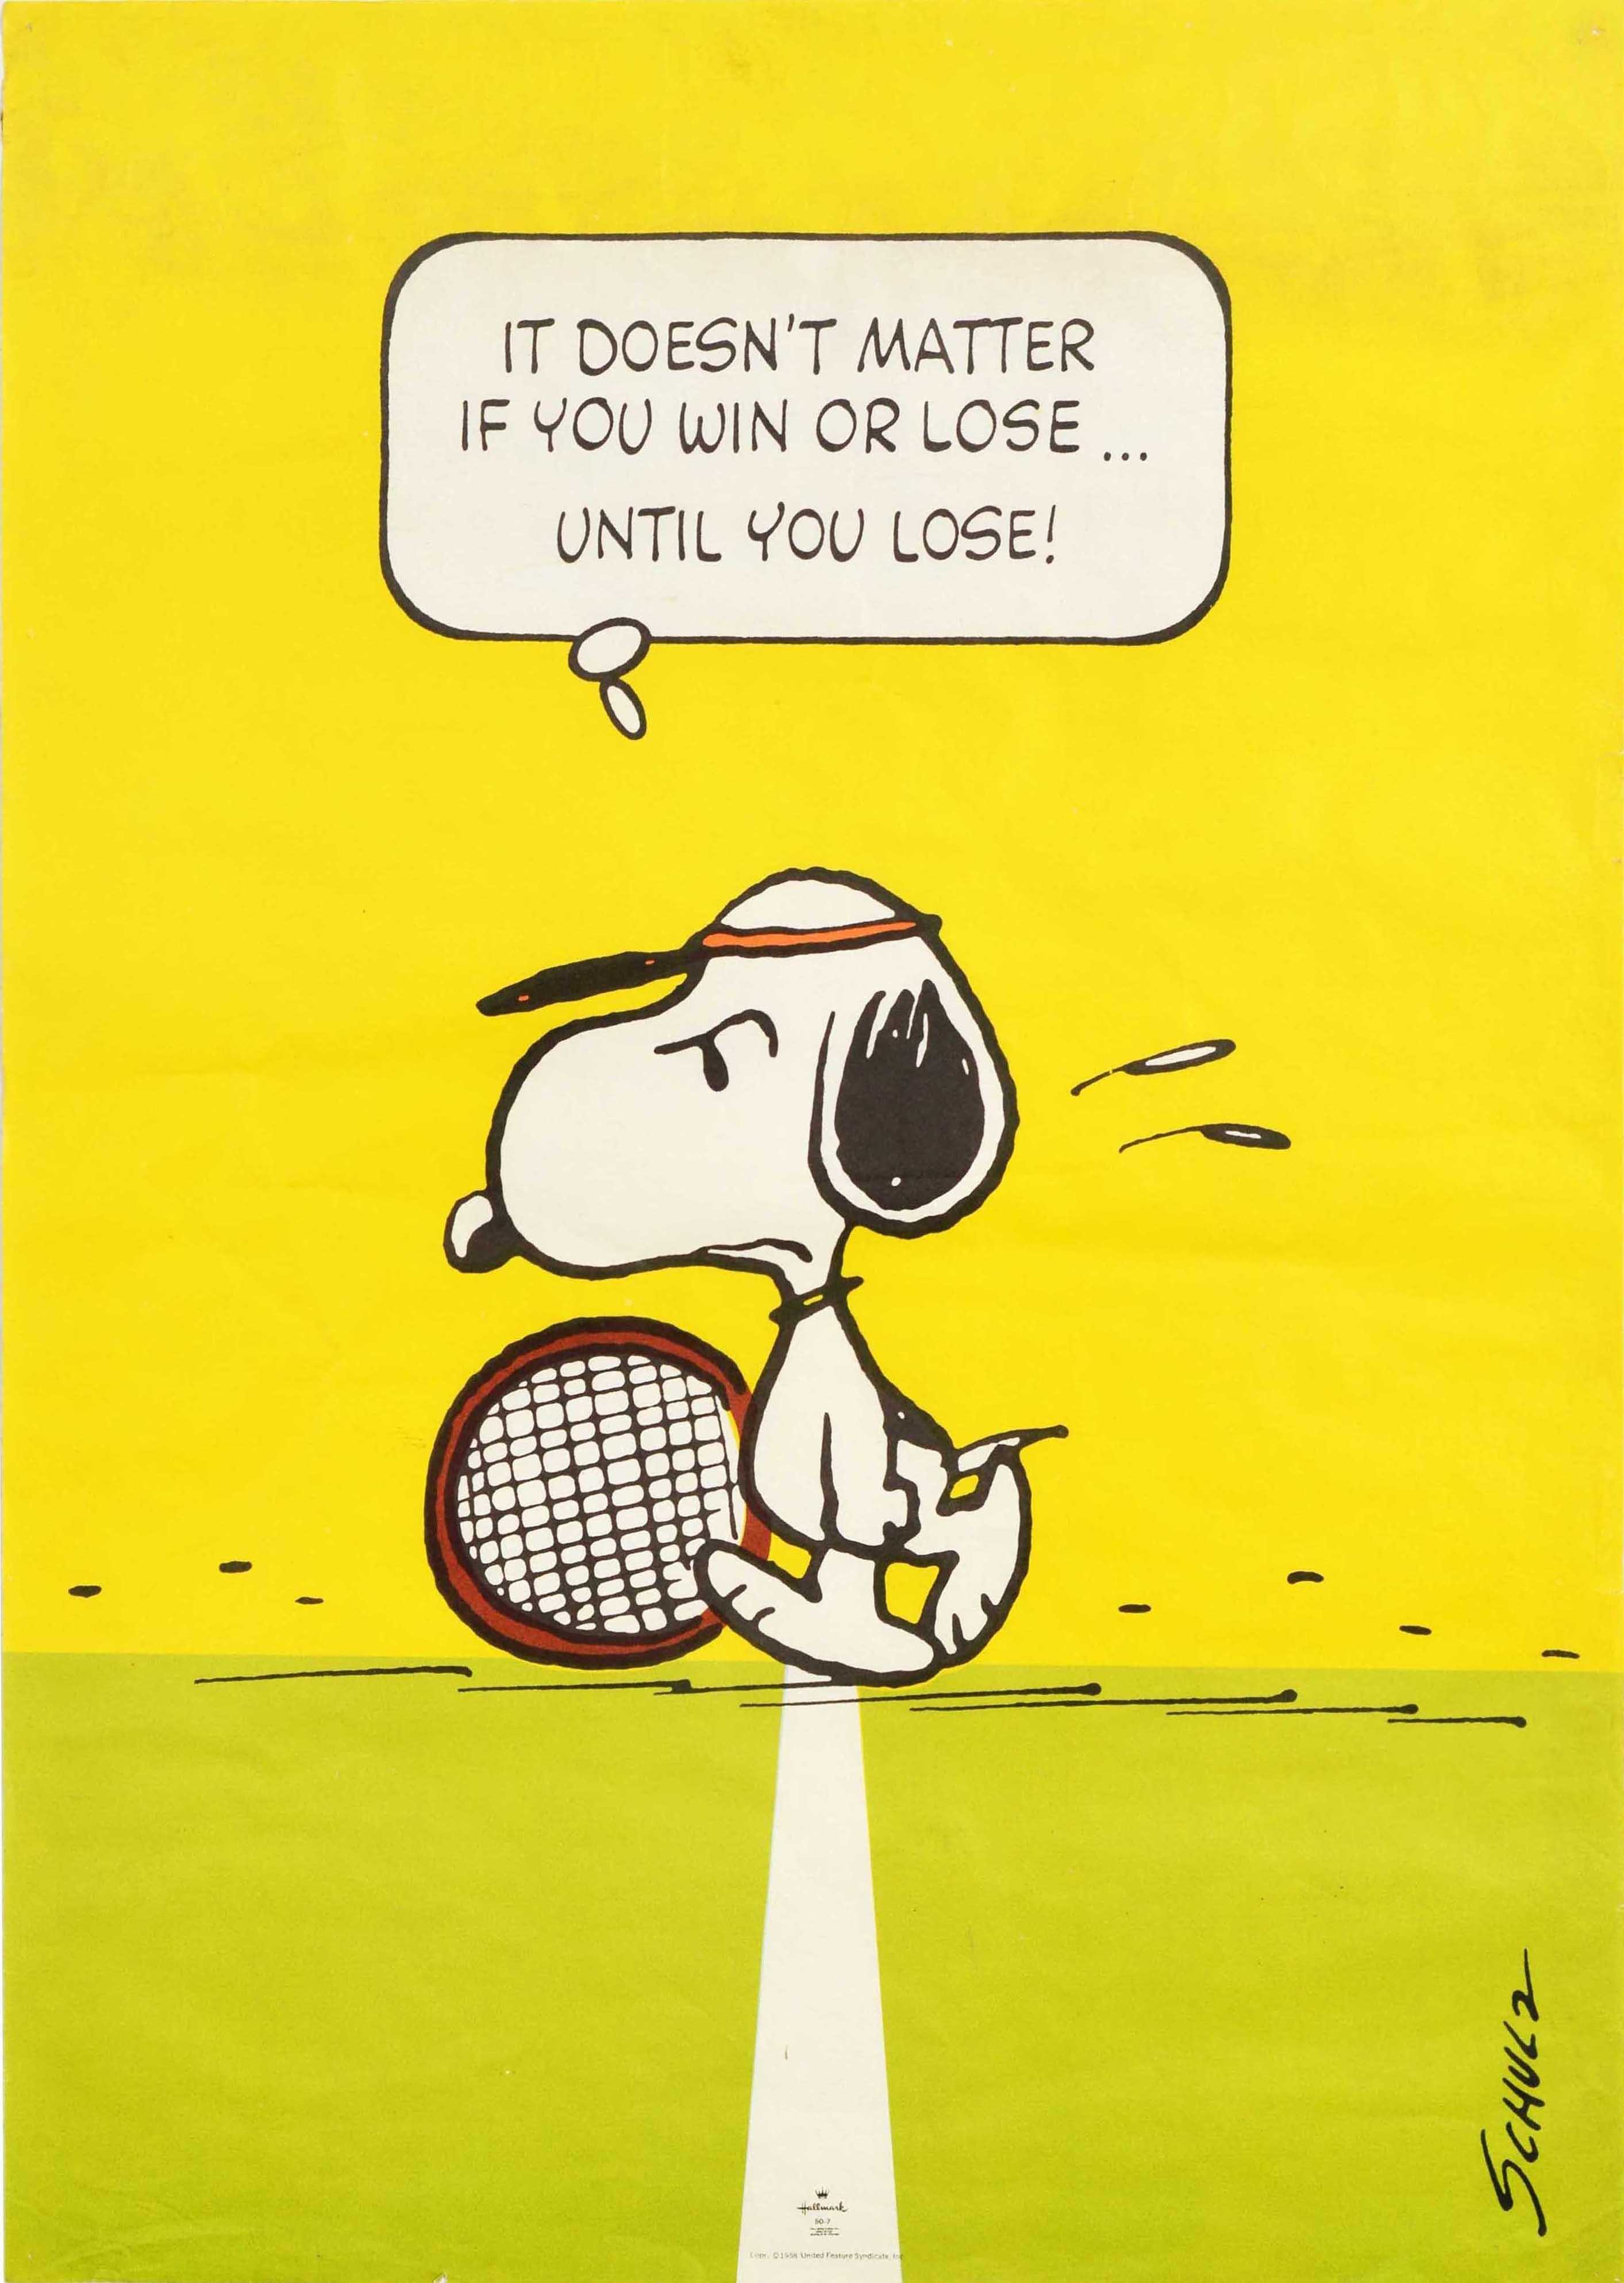 Charles M. Schulz Print - Original Vintage Snoopy Tennis Poster - It Doesn't Matter If You Win Or Lose...